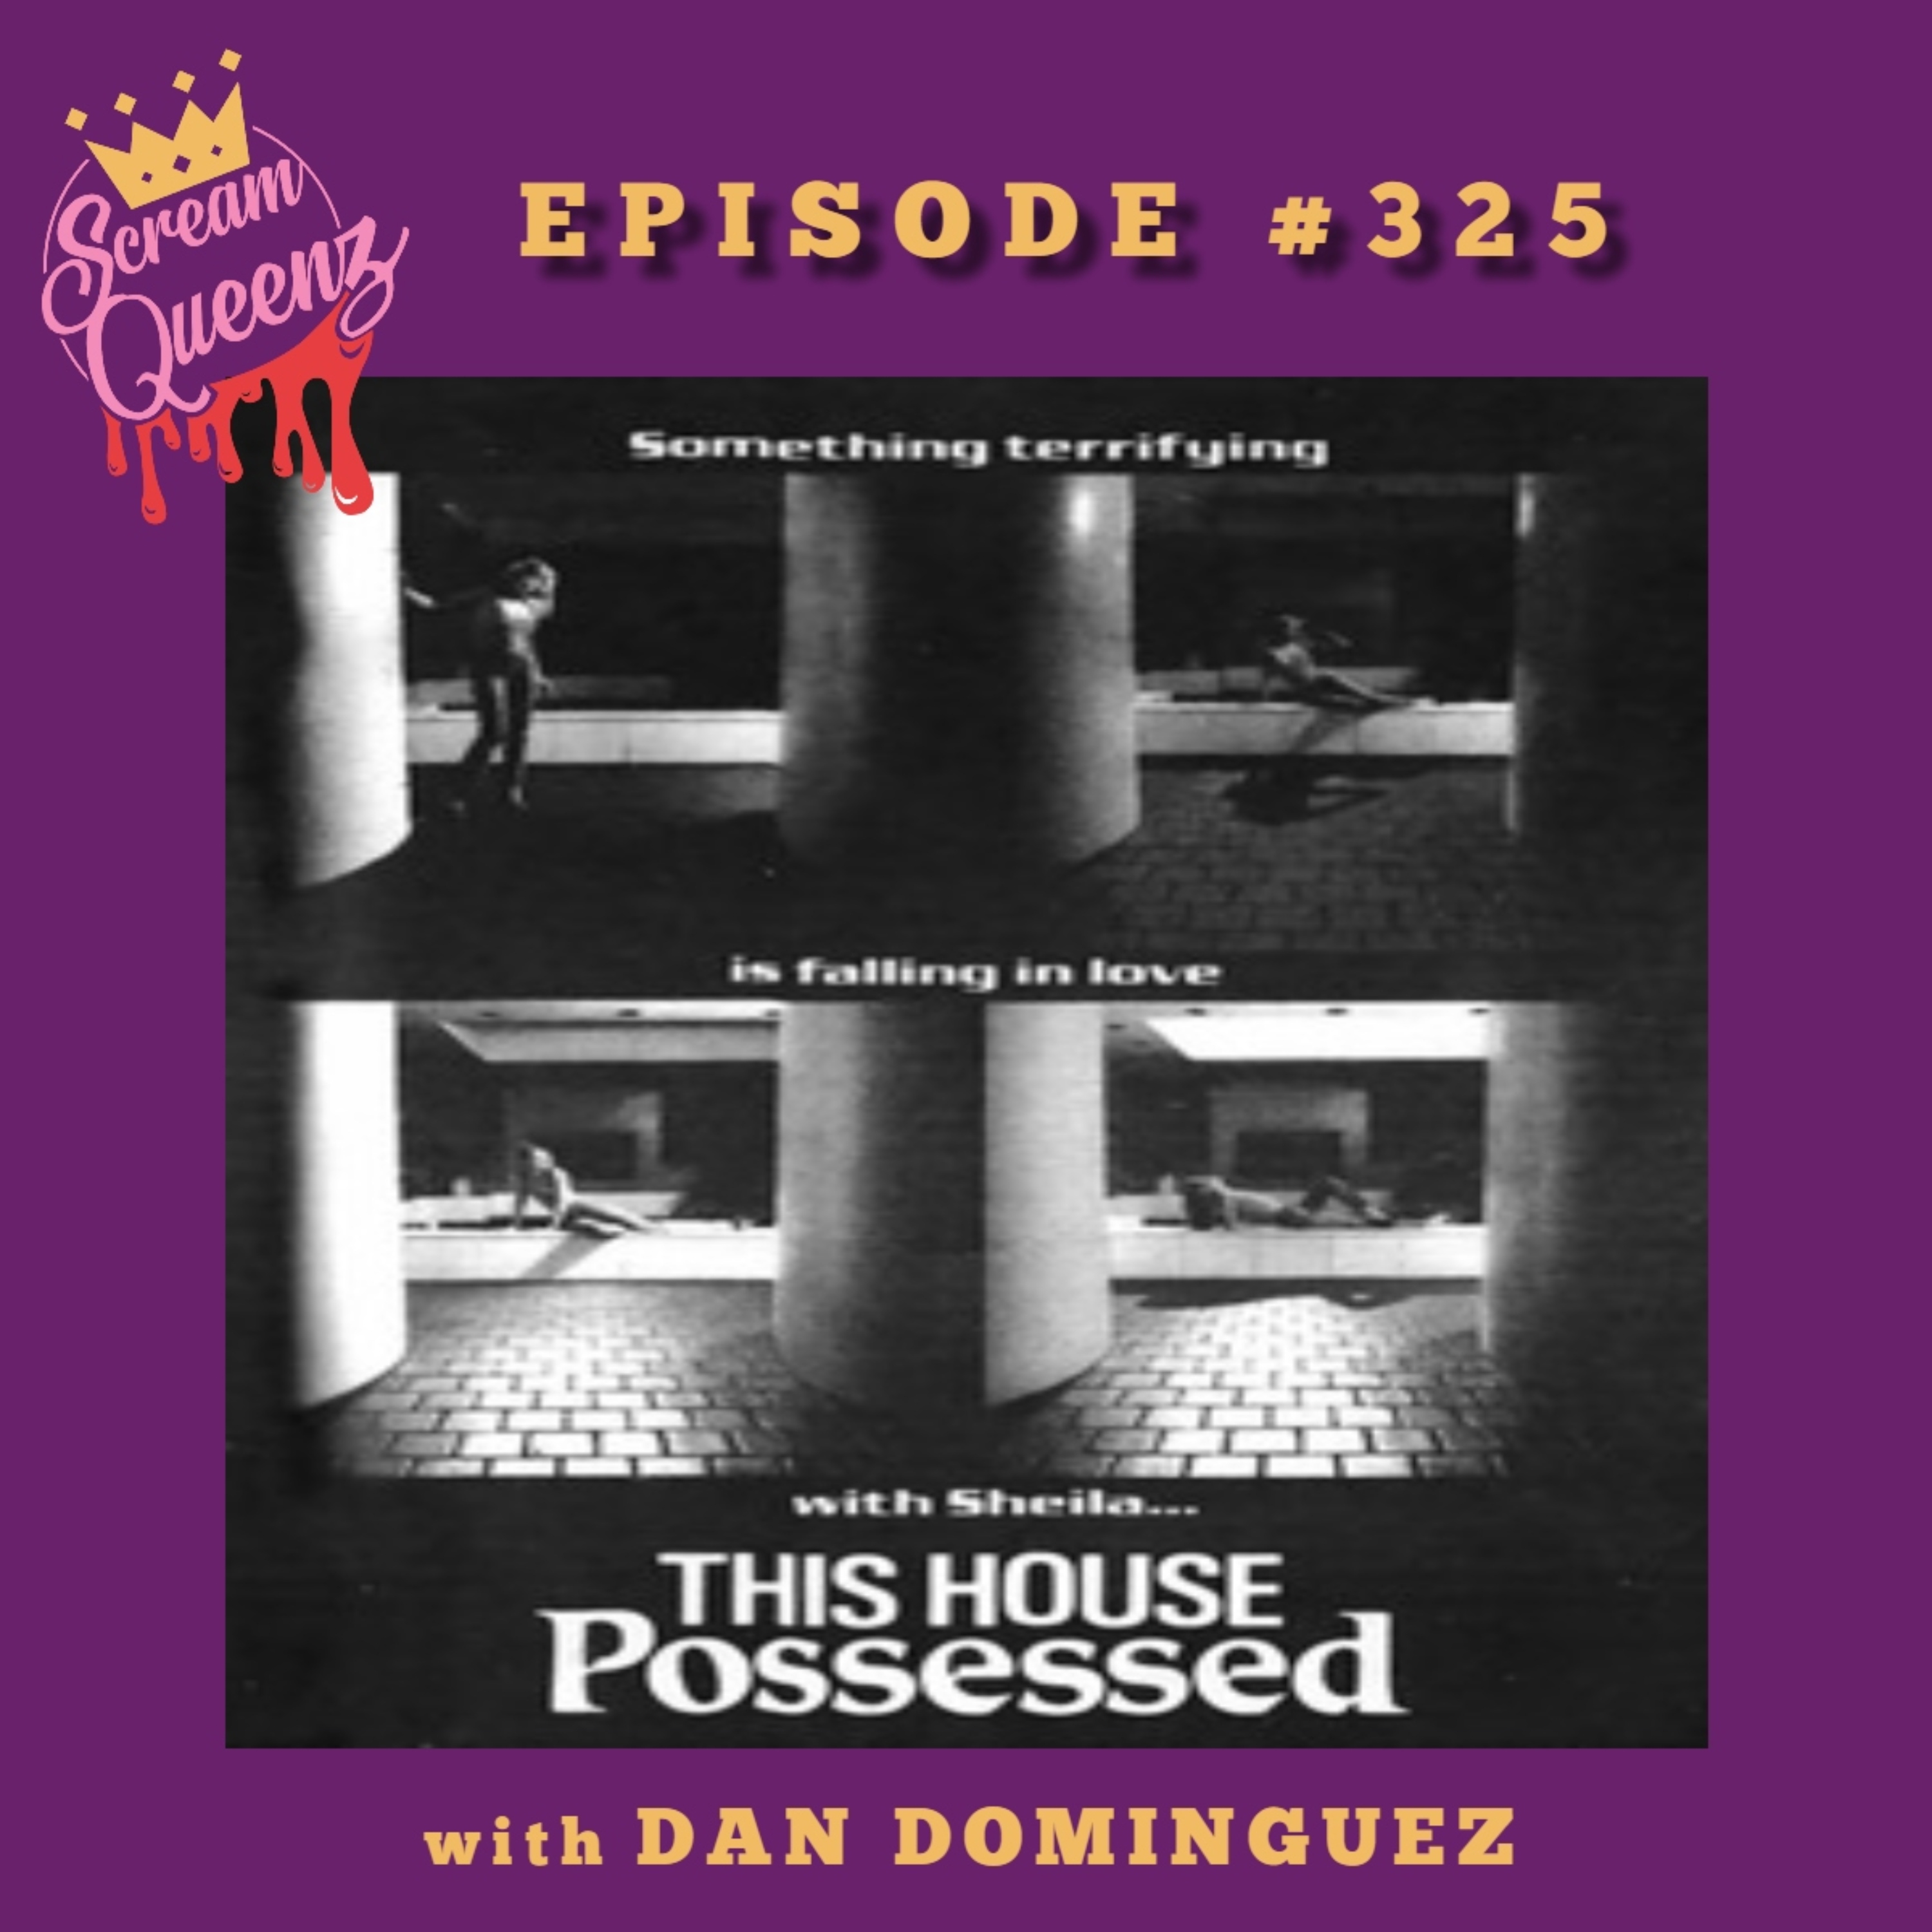 IT CAME FROM THE 70s! - "This House Possessed" with DAN DOMINGUES